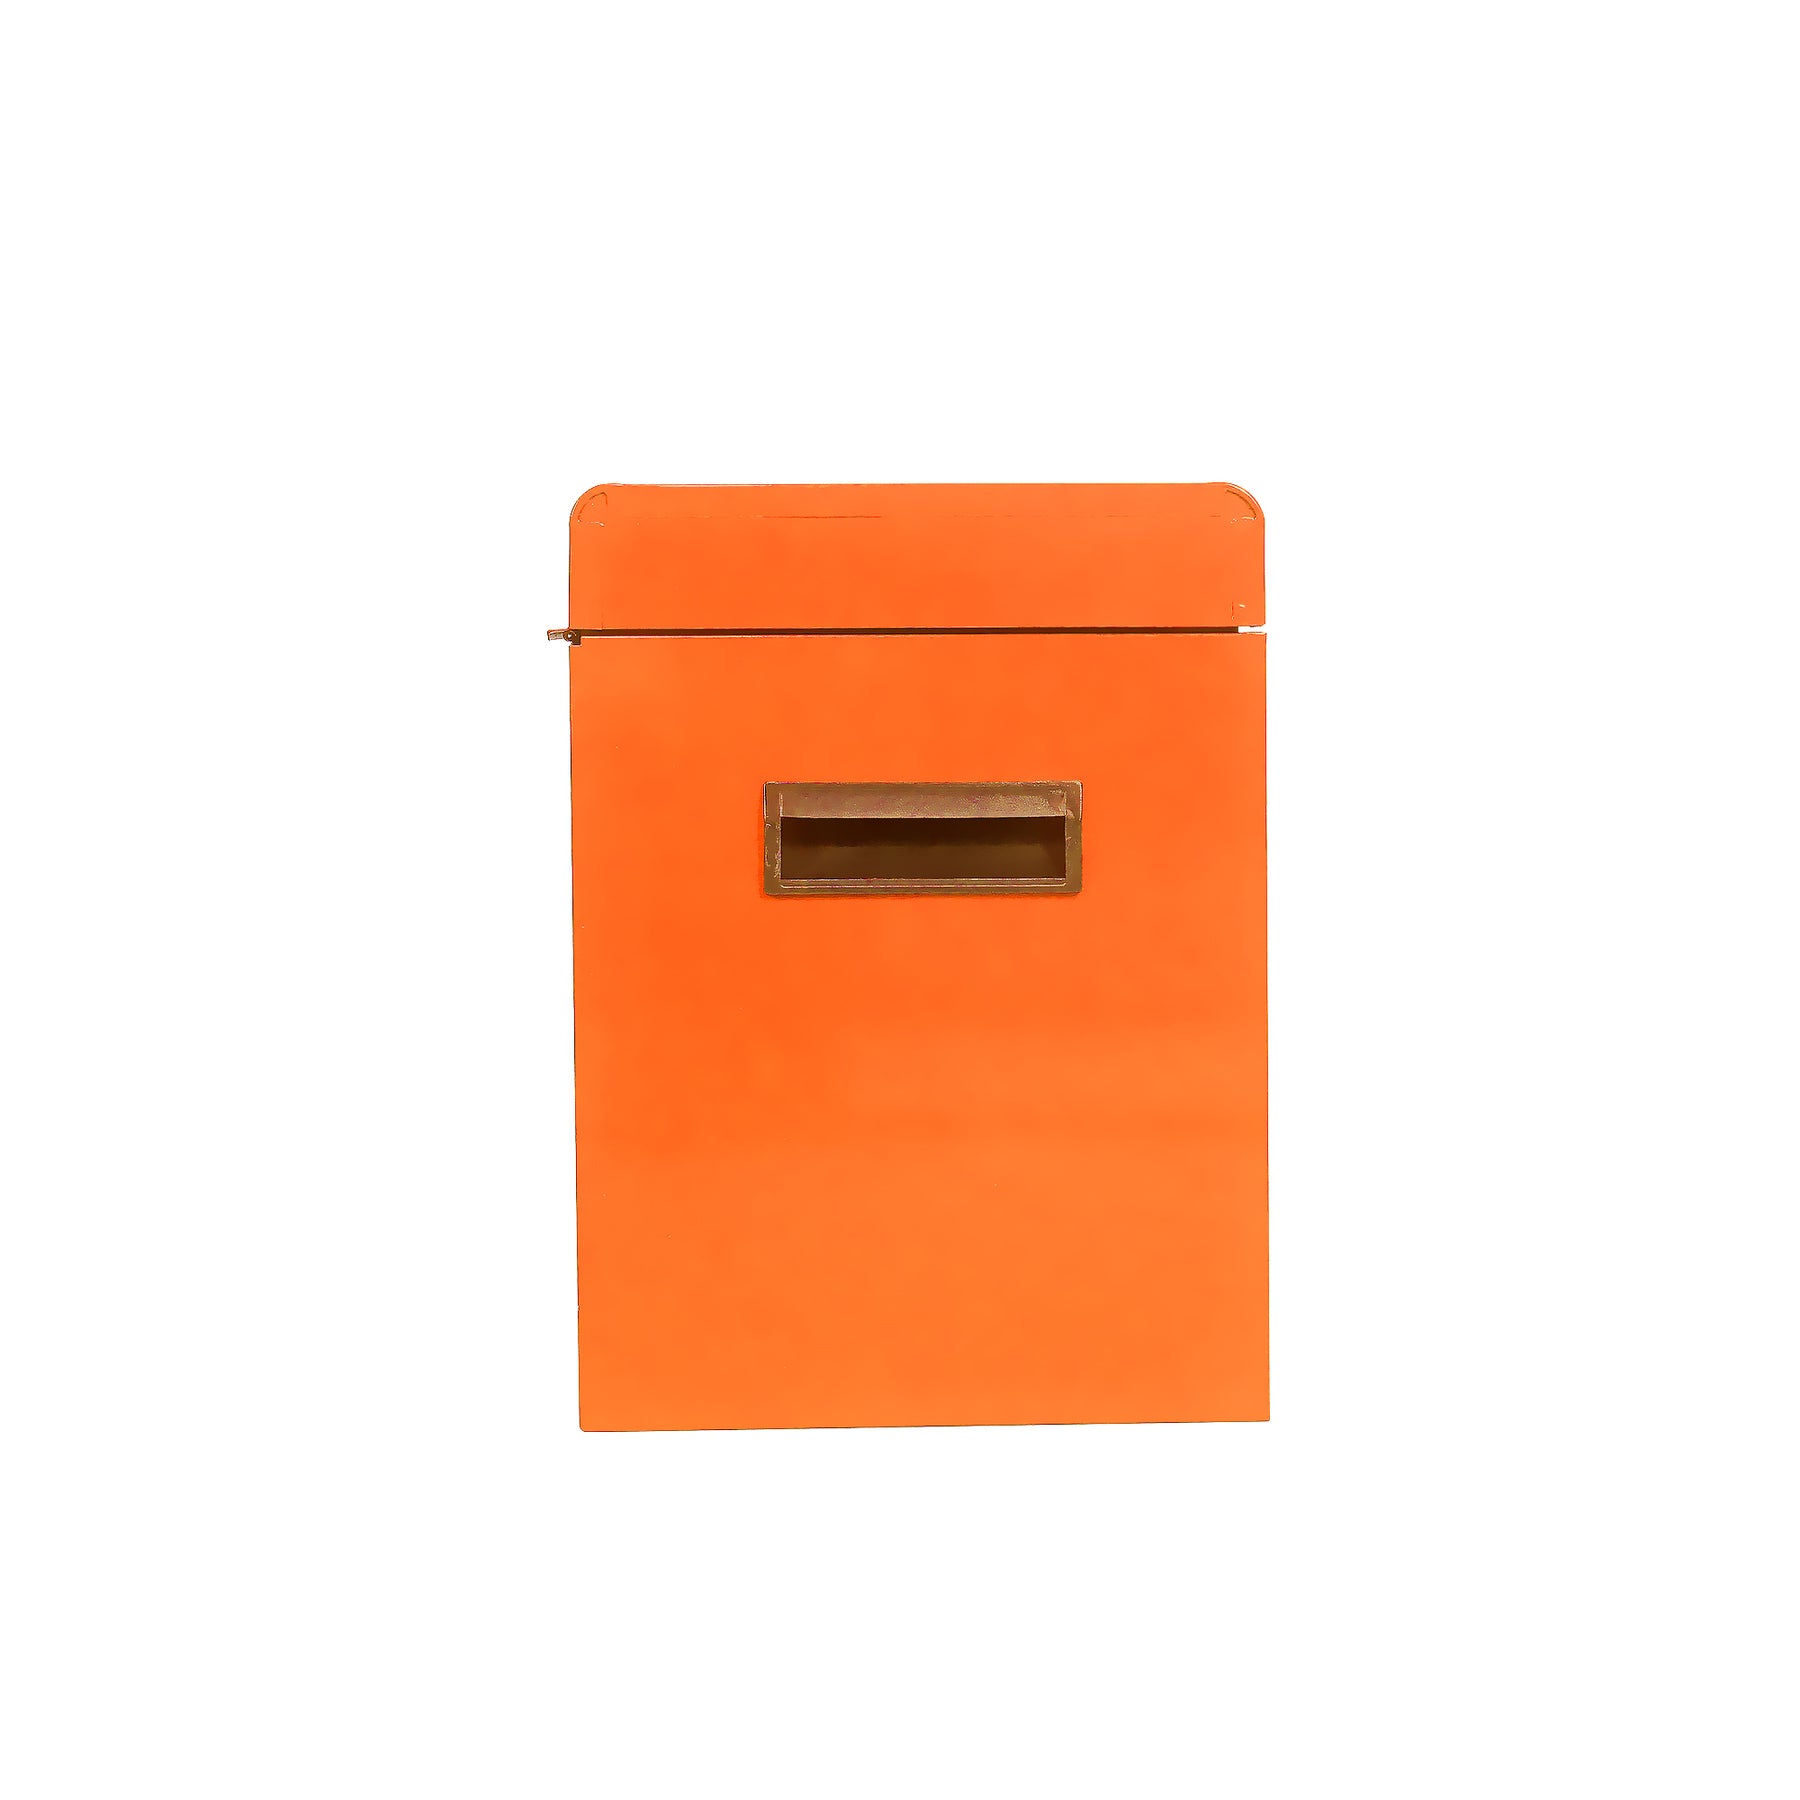 Detachable 5 Drawer Tool Chest with Bottom Cabinet and One Adjustable Shelf--Orange - Tonkn